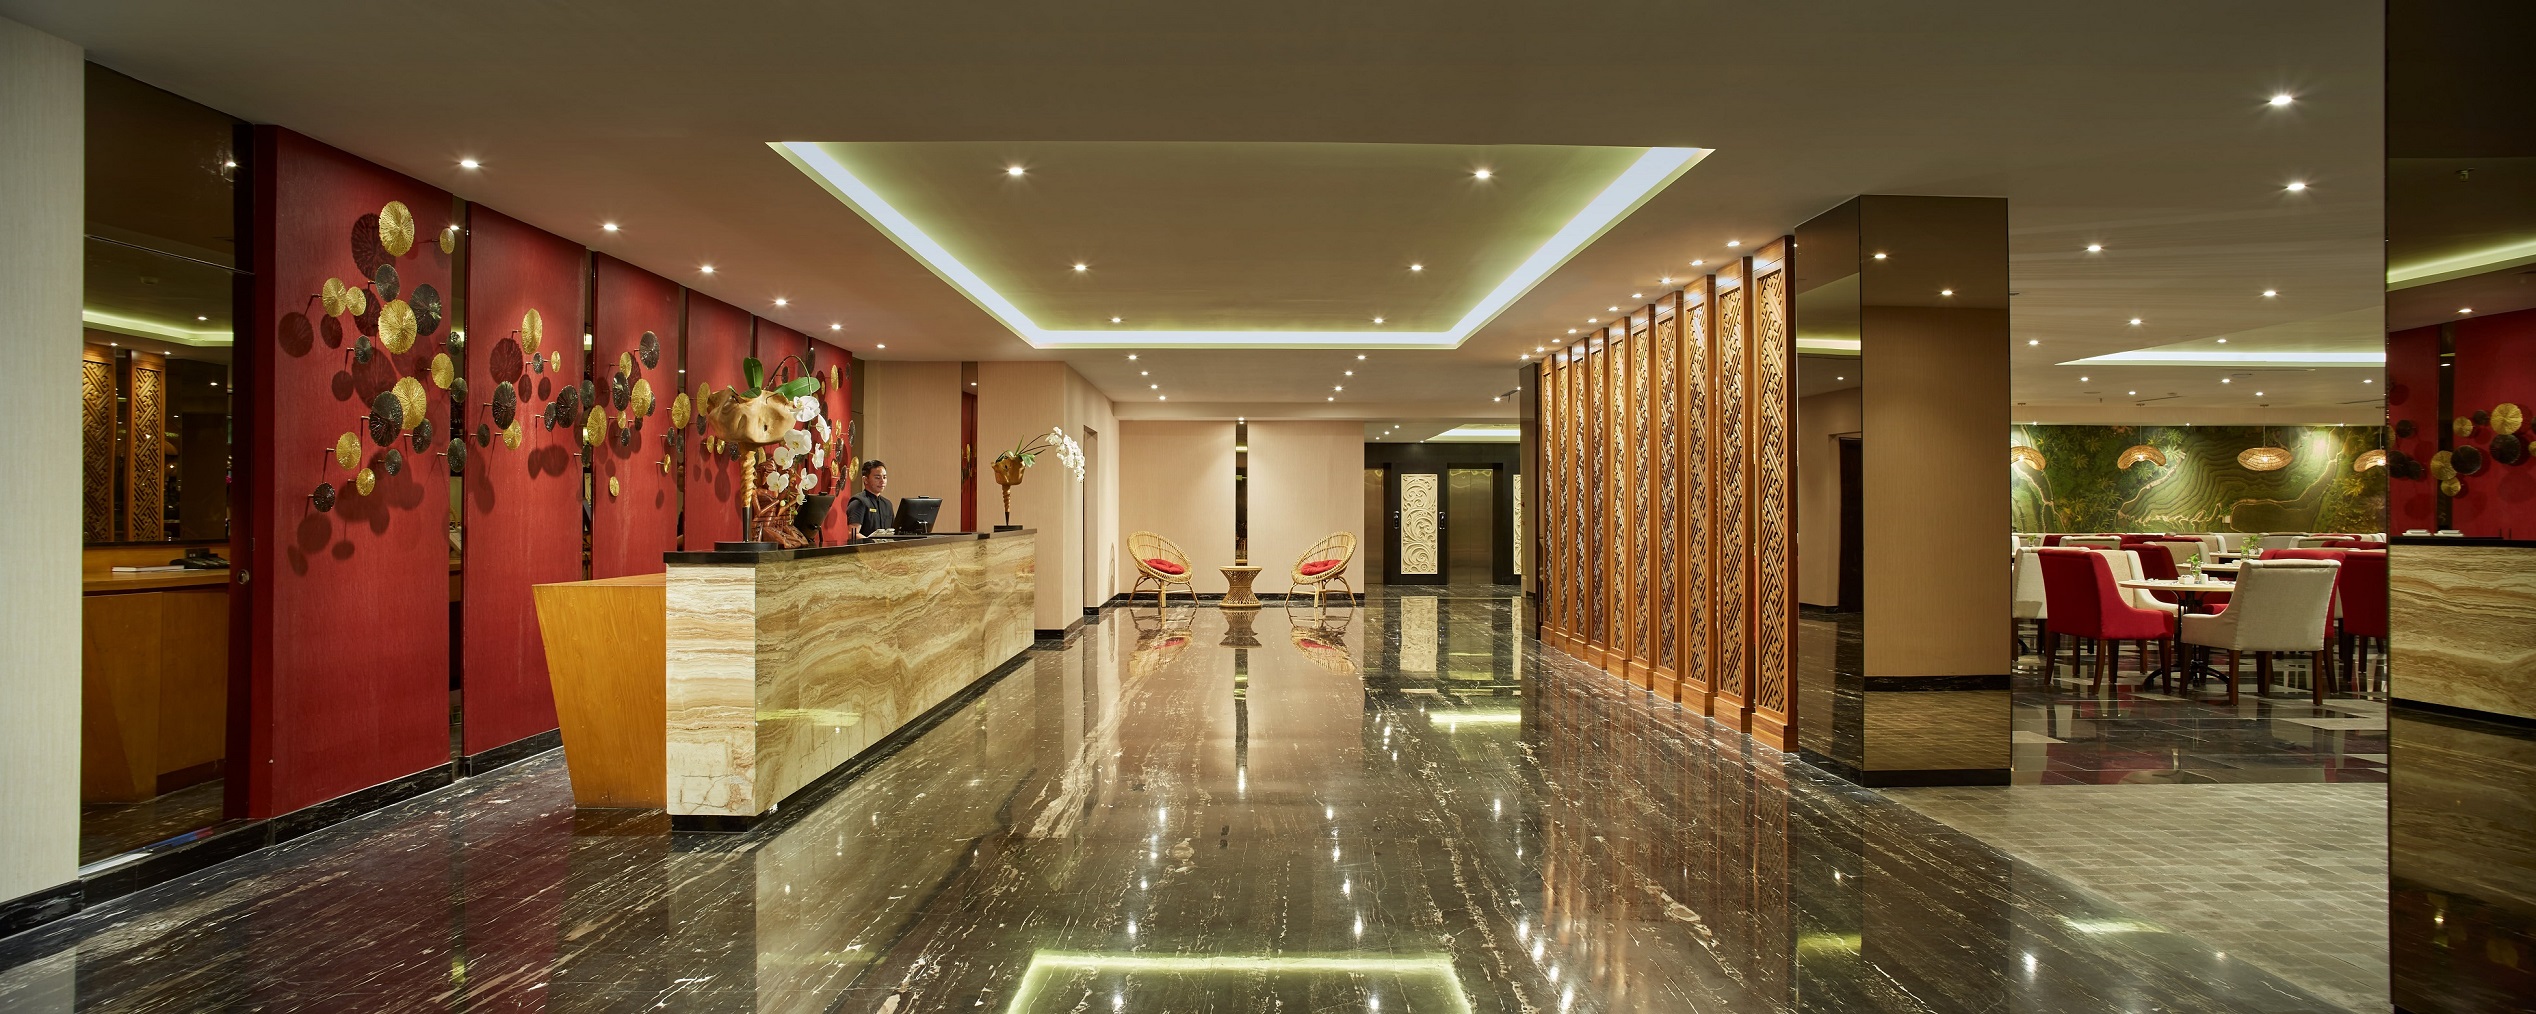 Four Star by Trans Hotel, a Premium Four-Star Hotel in the Heart of